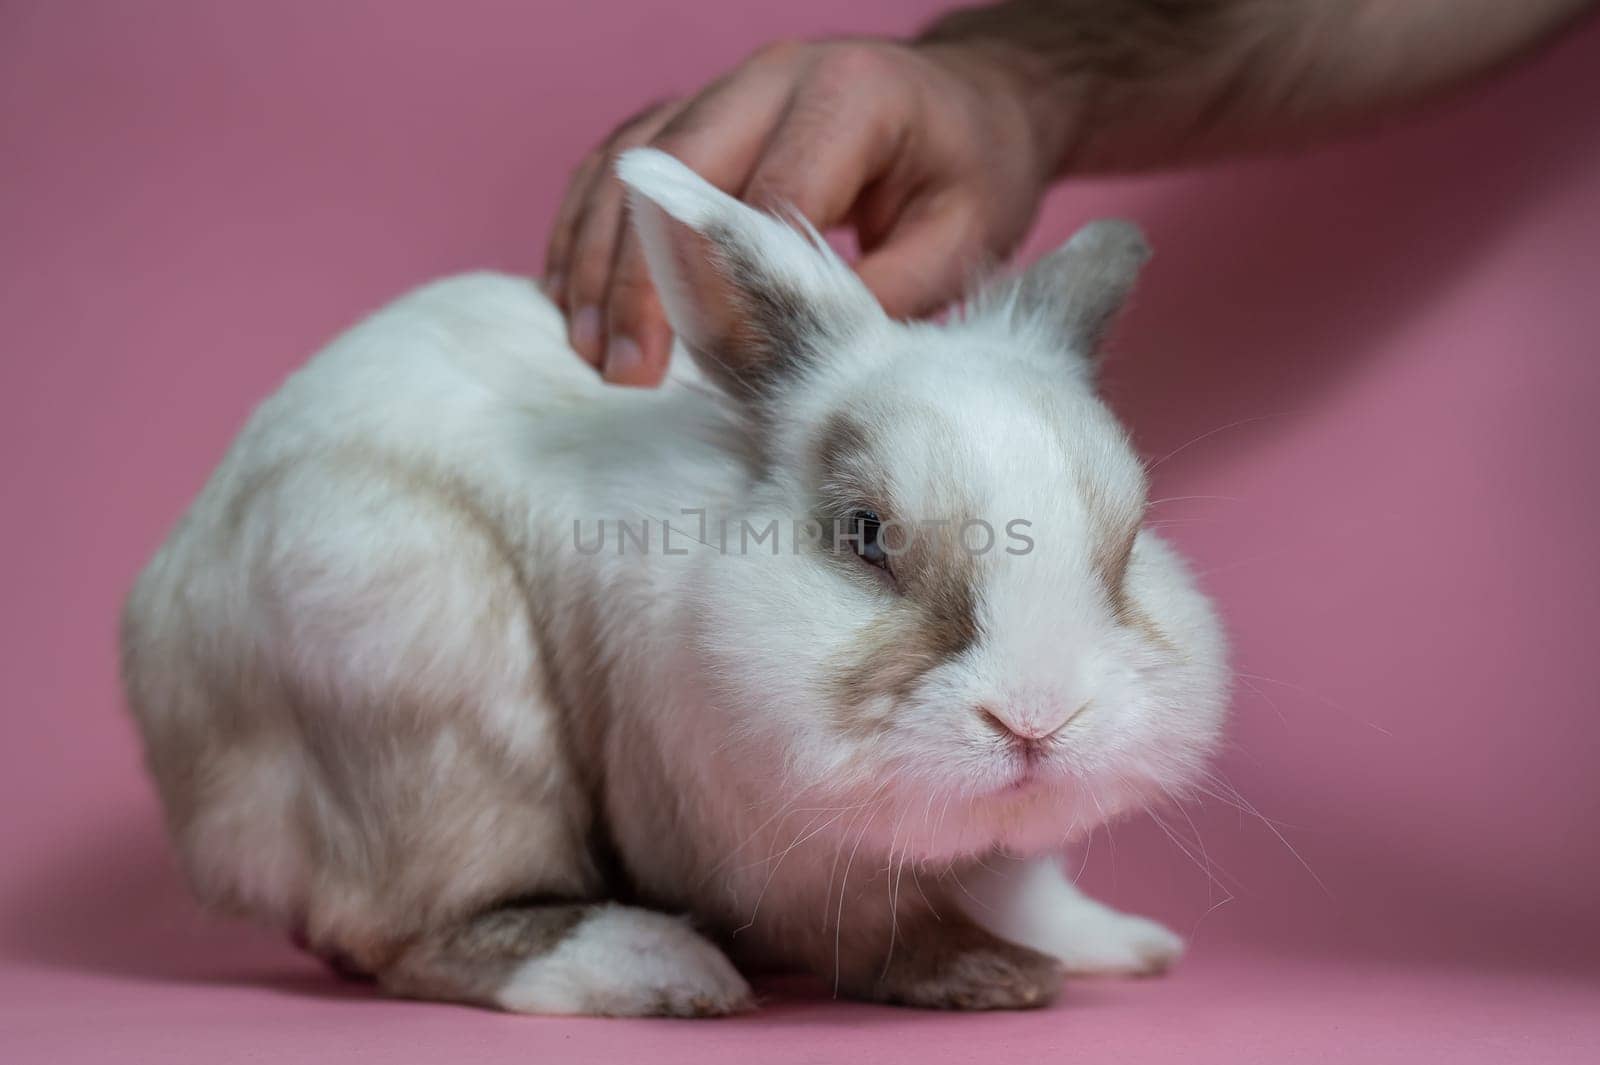 A man pets a cute gray and white rabbit on a pink background. by mrwed54